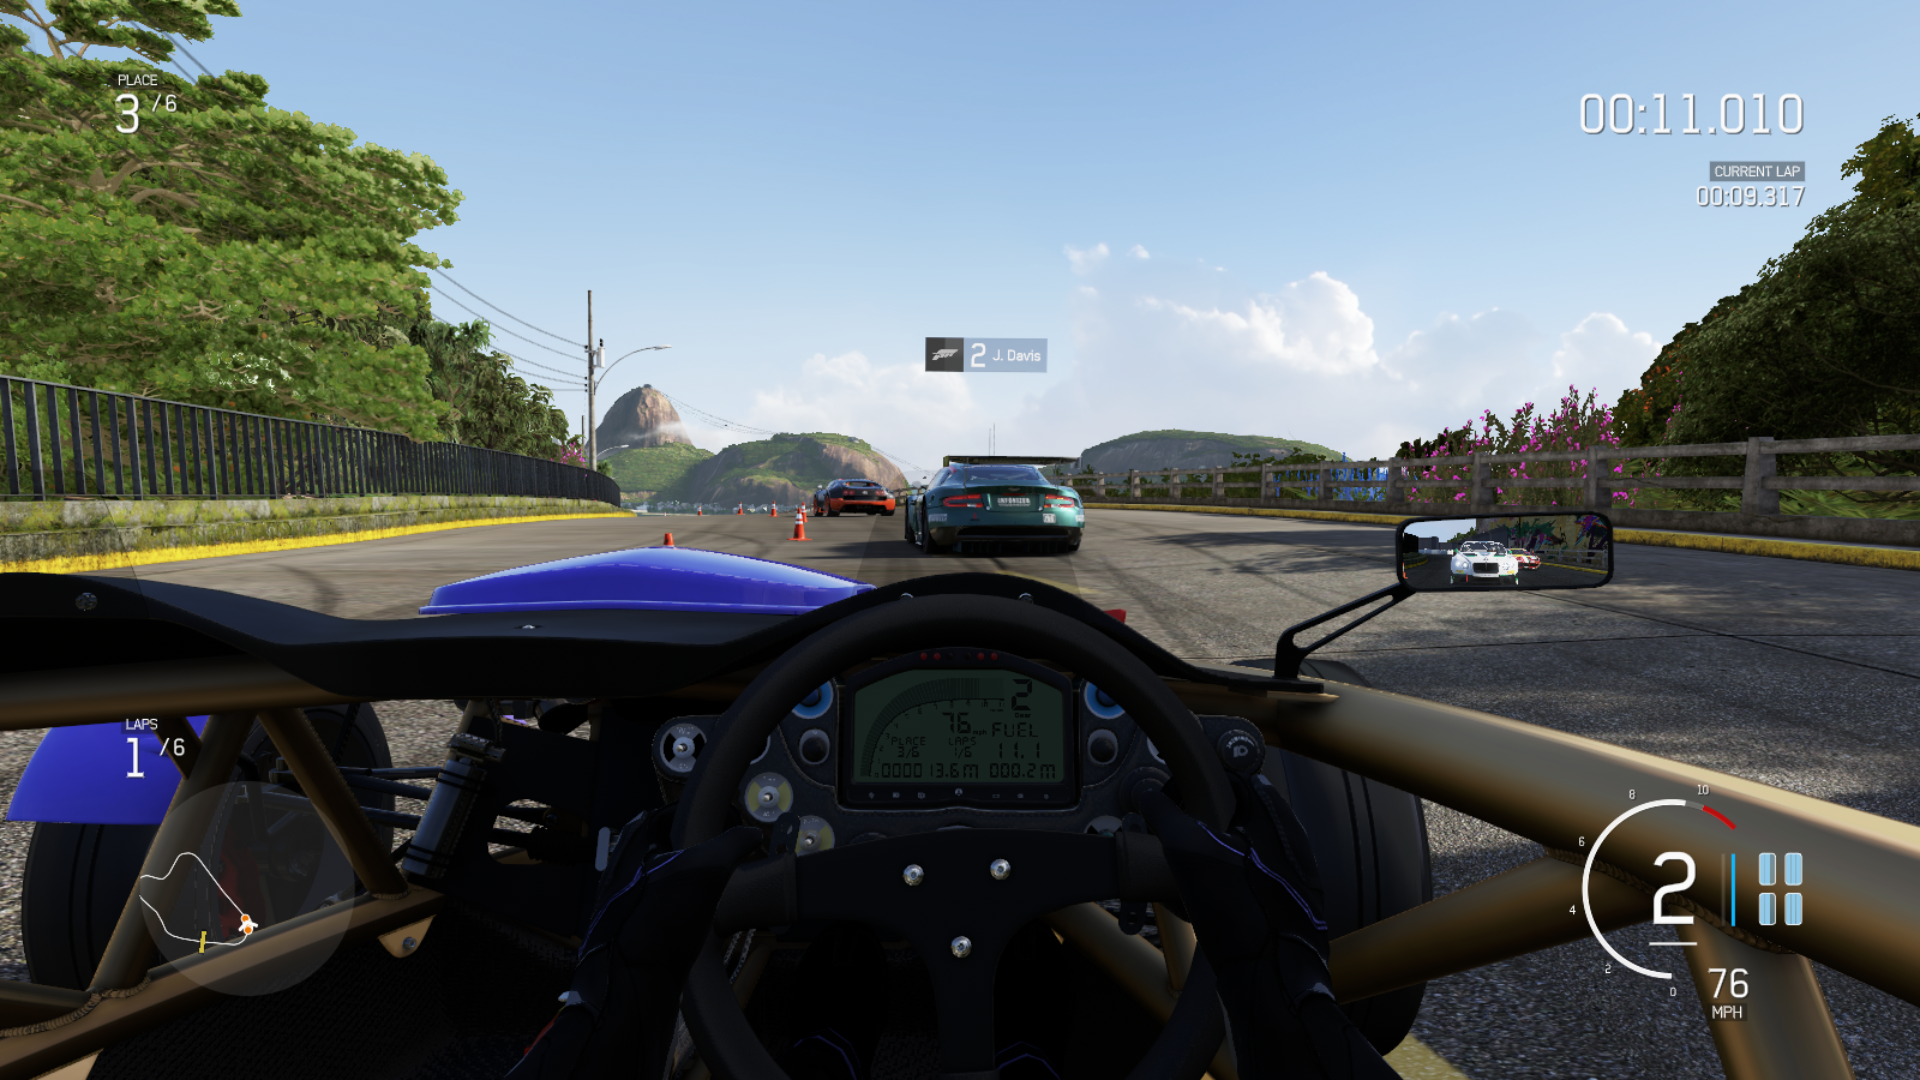 Forza Motorsport 6: Apex makes its PC debut